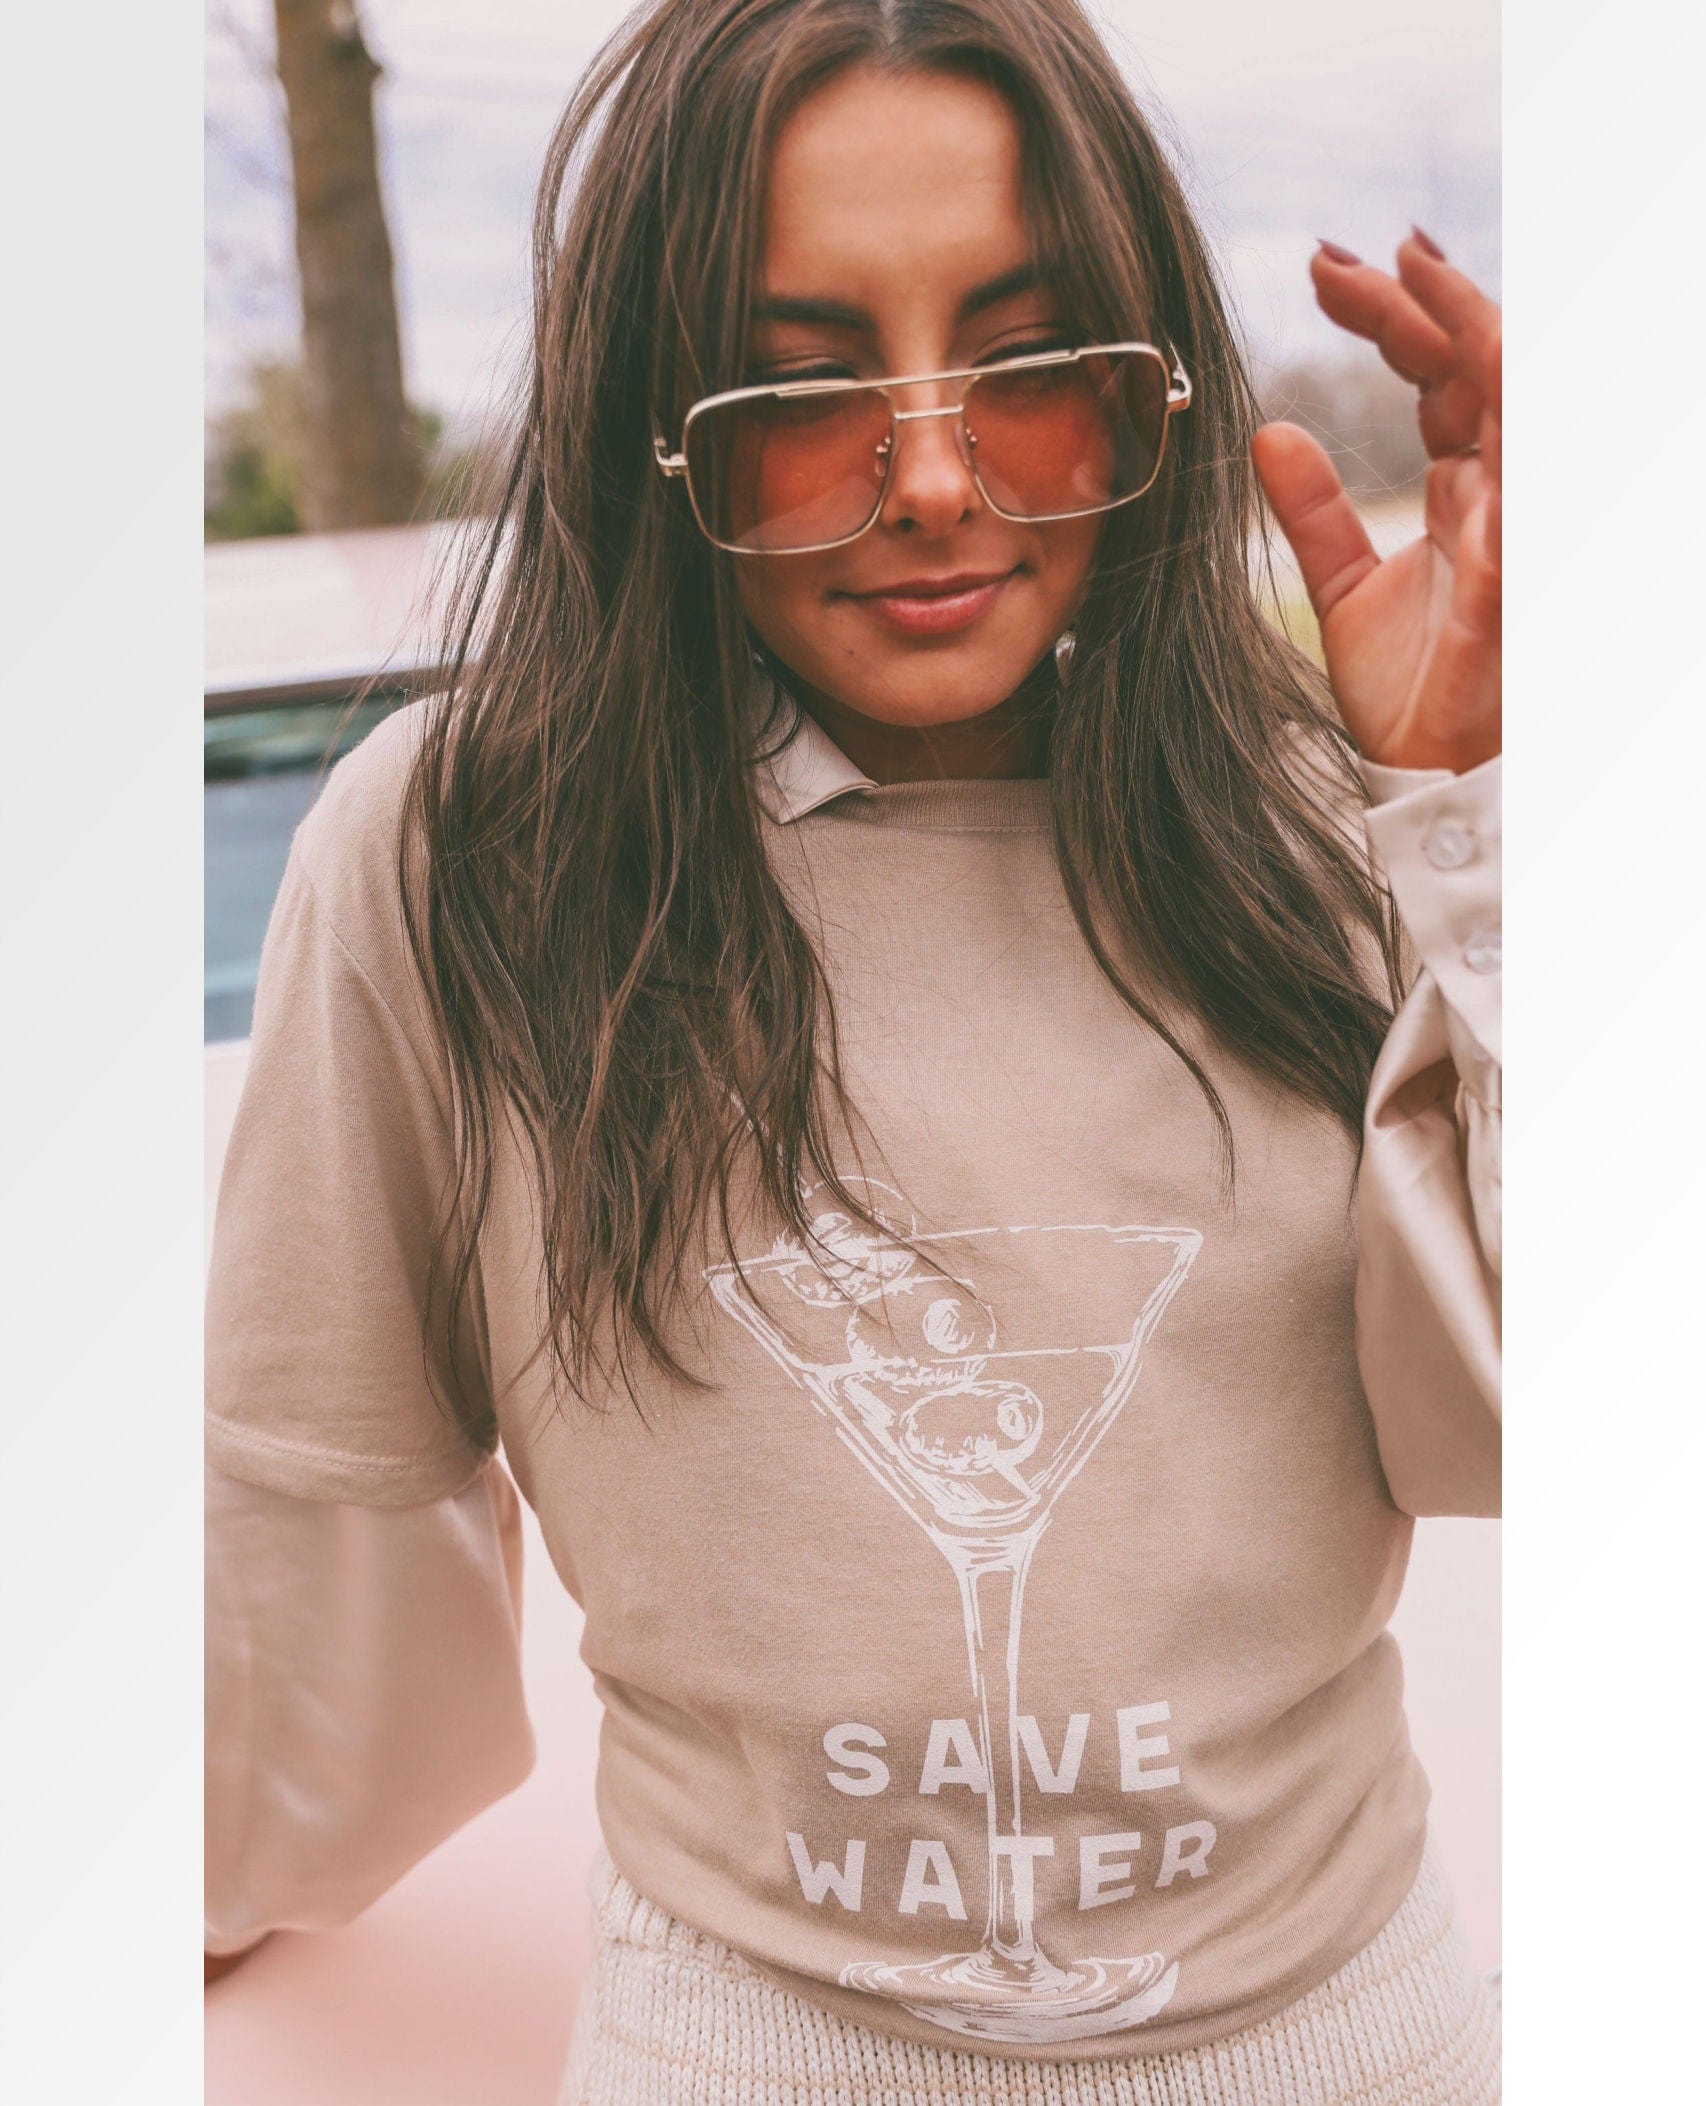 Save Water T-Shirt New